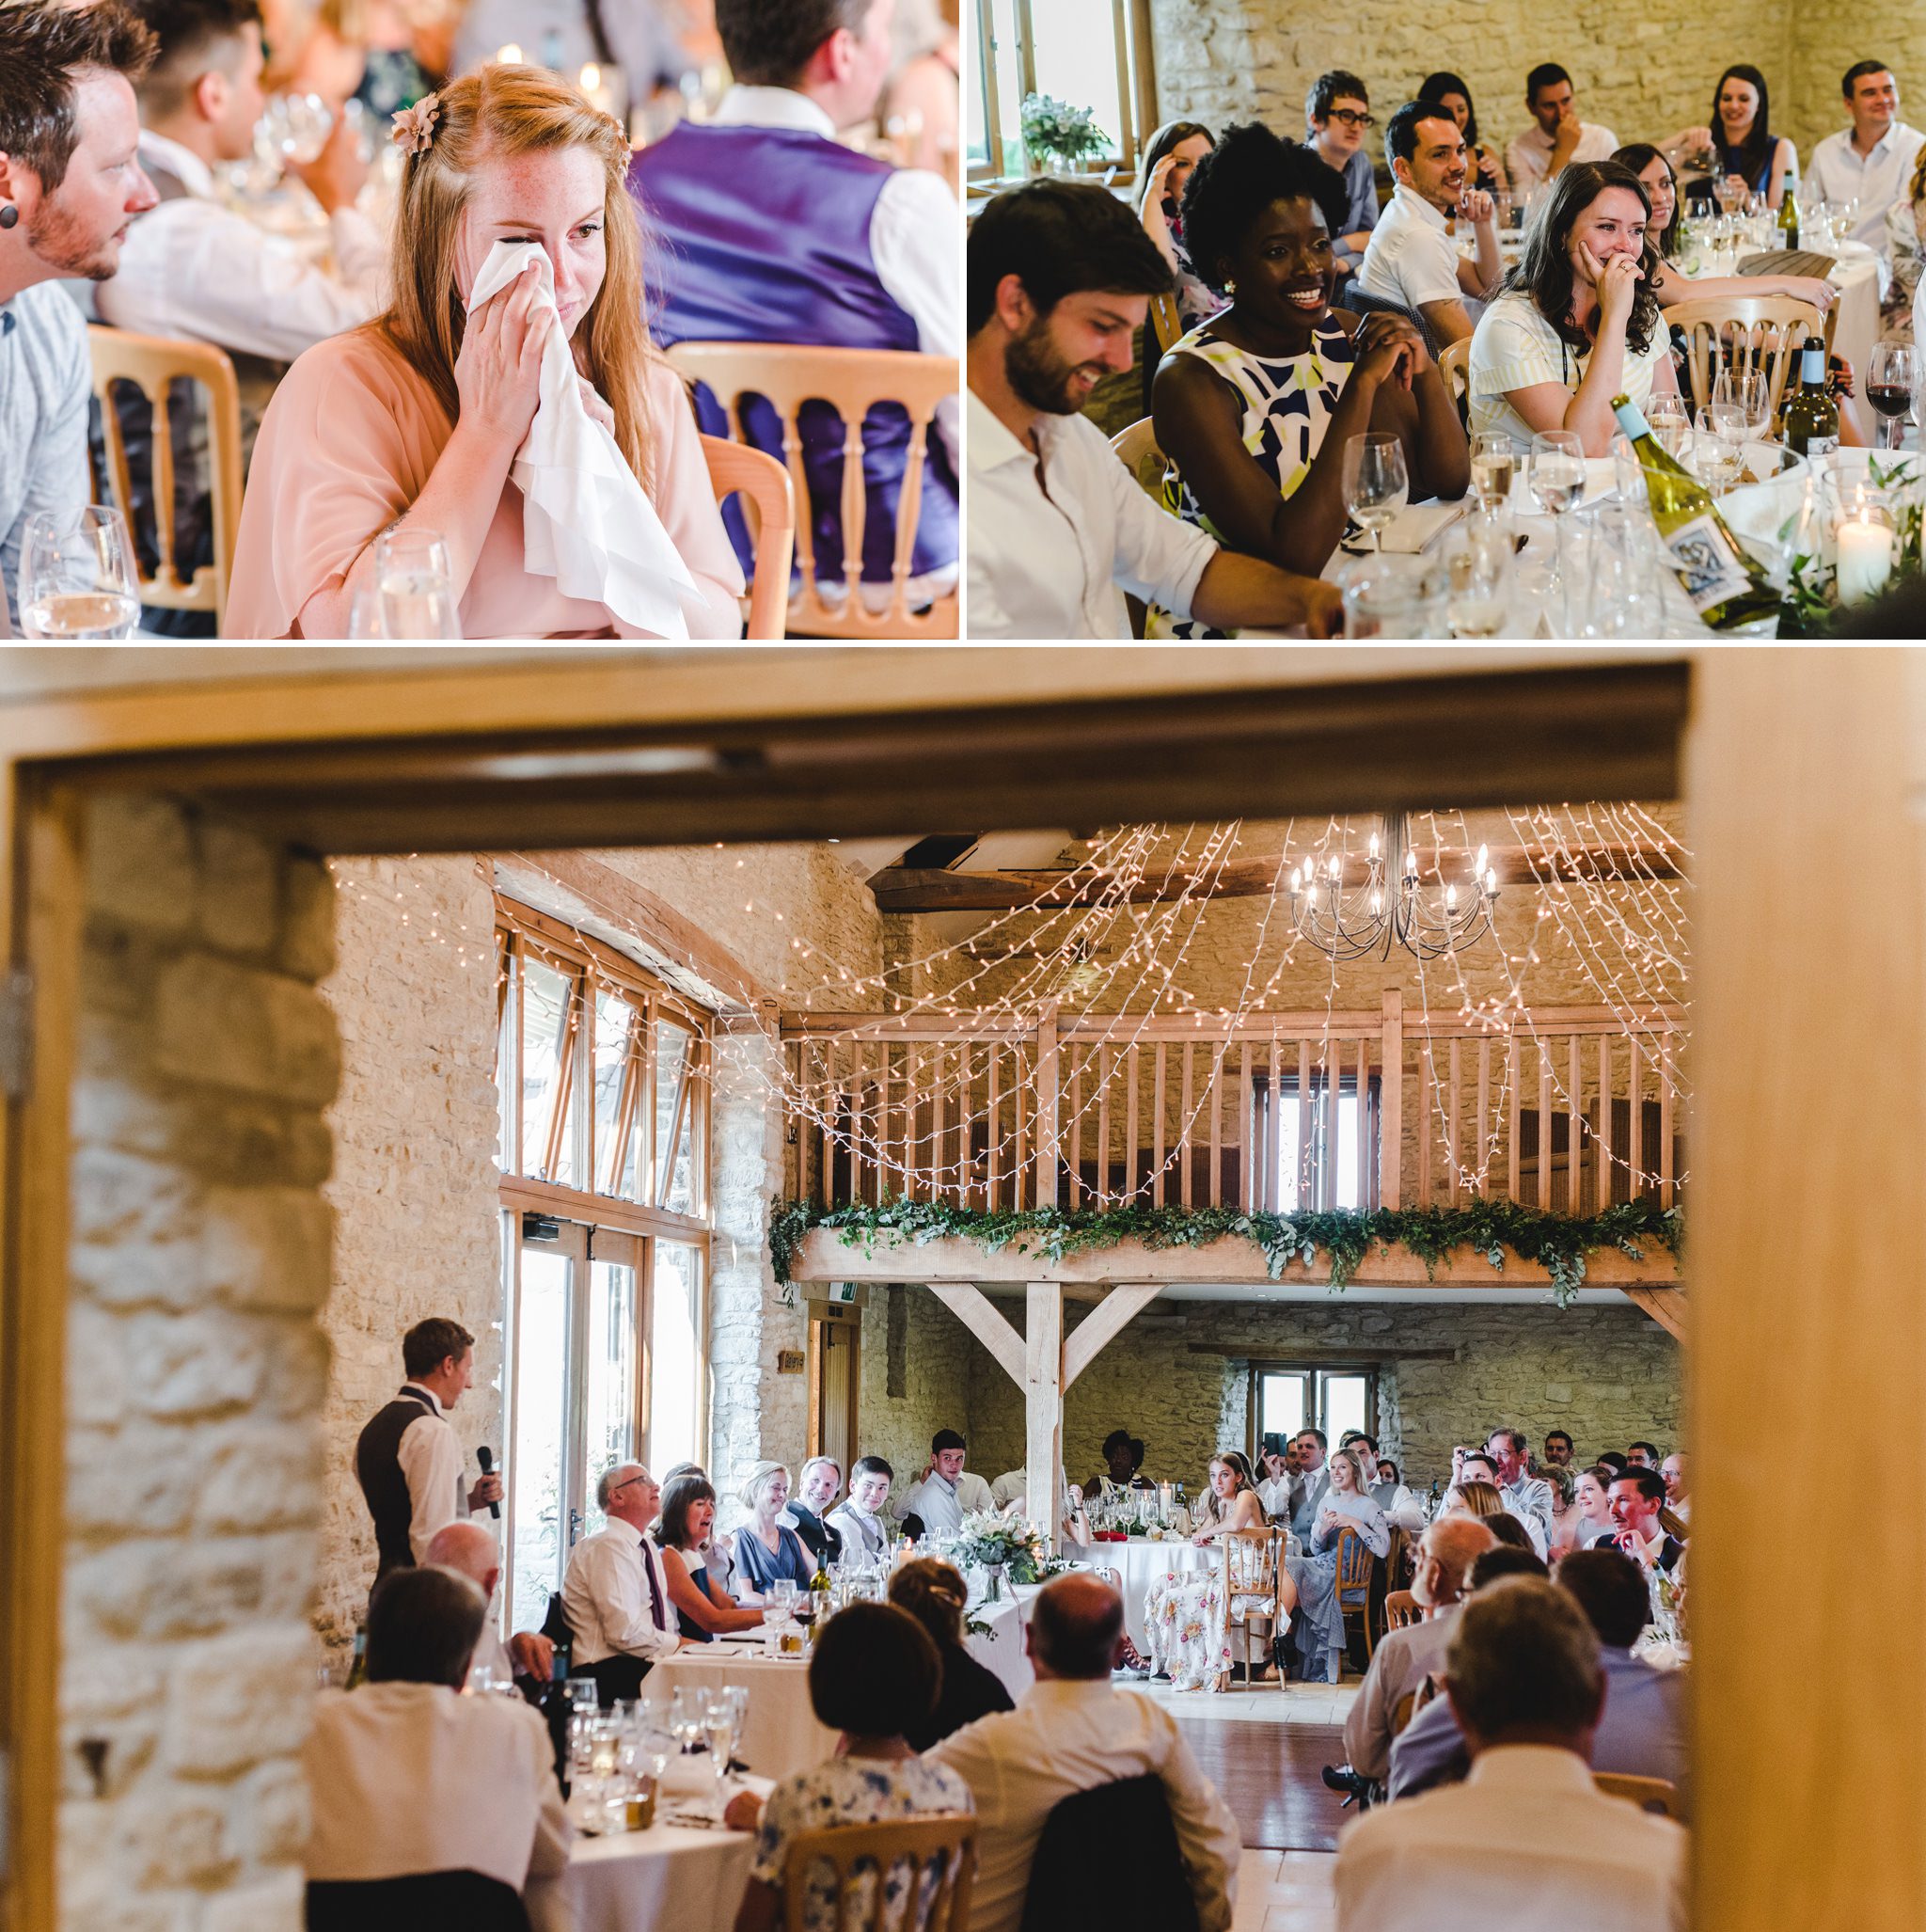 Wedding speeches in the main room at Kingscote